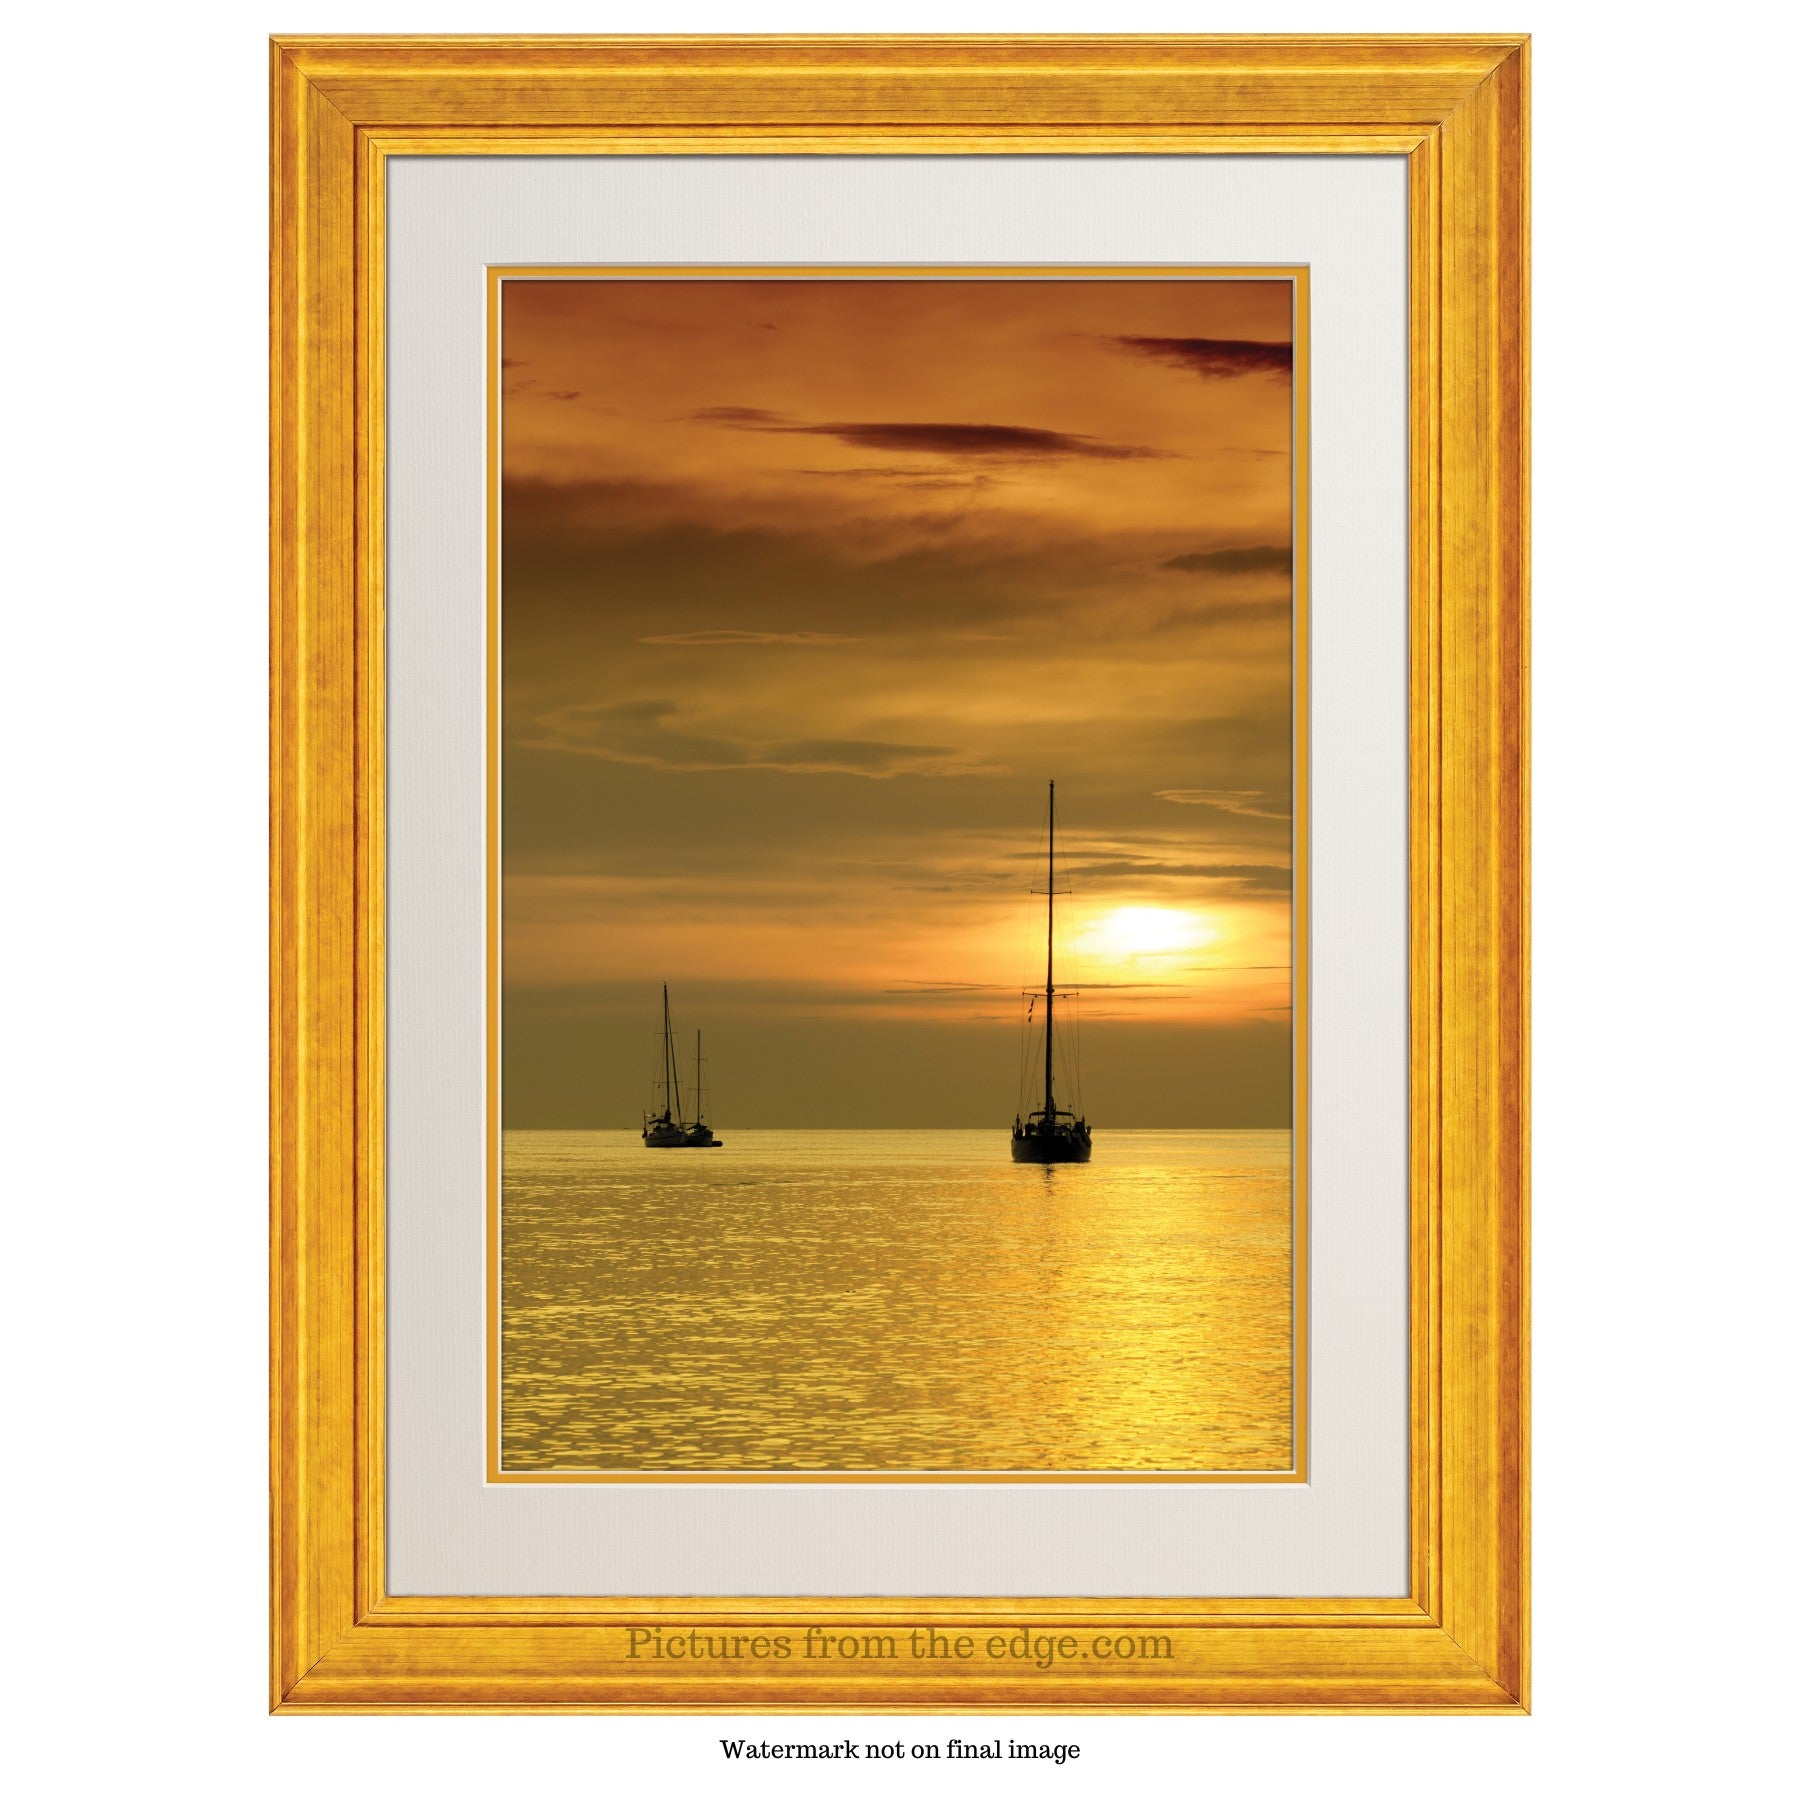 BeMoved by Sunset on Sailboats Poster. Movable and Removable!